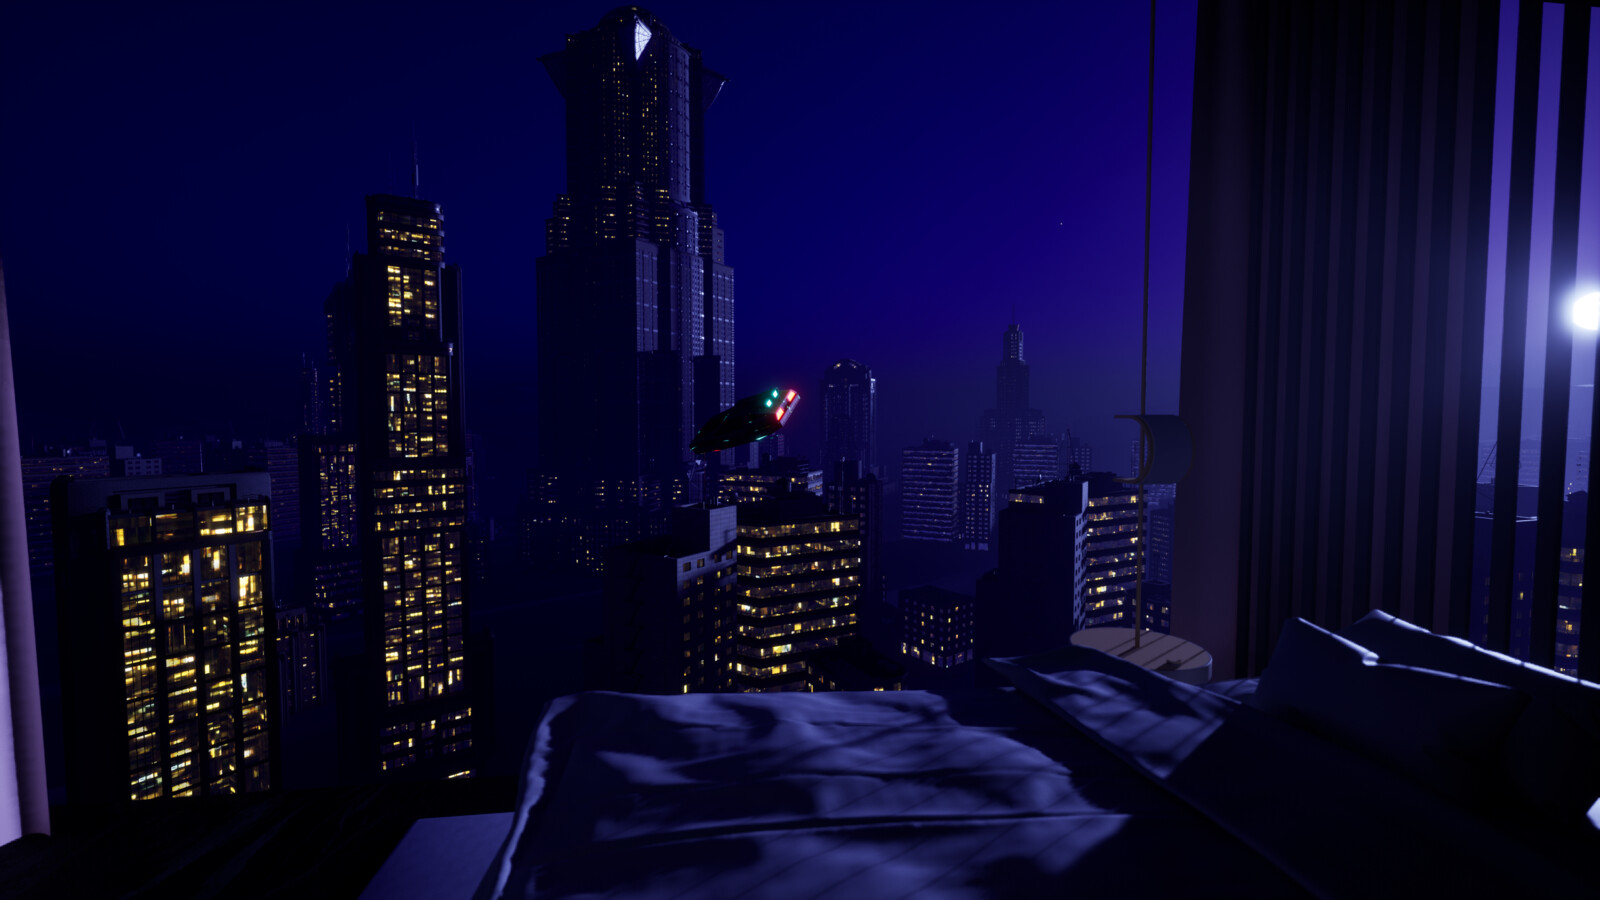 Kitbashin' and lighting in Unreal Engine 5 - Futuristic City - Lighting Test - Real-Time Rendering